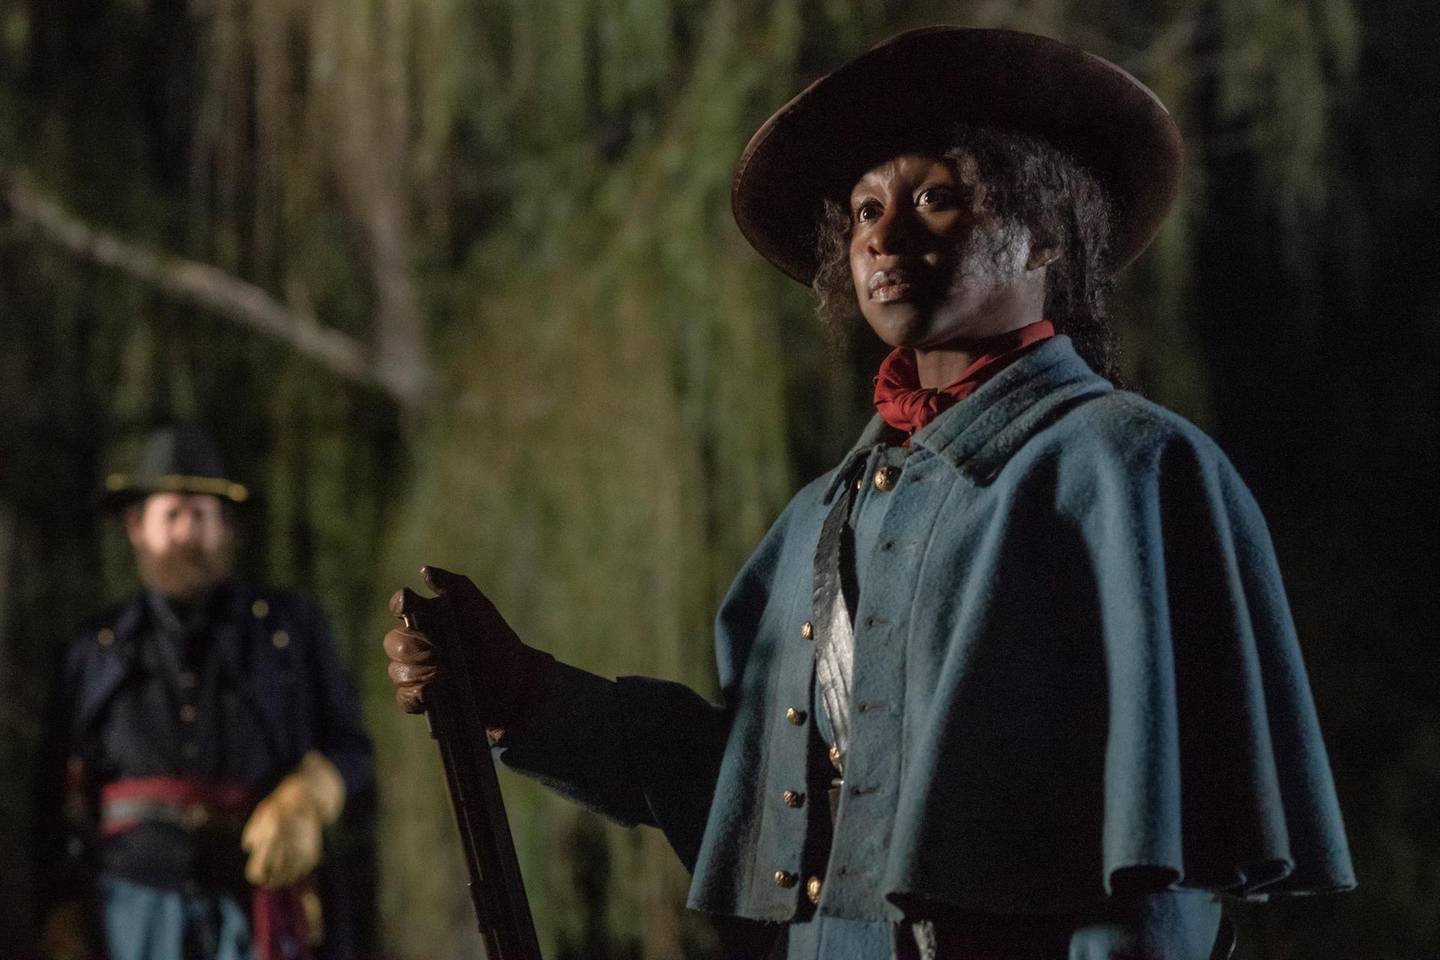 This image released by Focus Features shows Cynthia Erivo as Harriet Tubman in a scene from "Harriet." According to new research released Tuesday, Feb. 4, 2020 by the University of Southern California's Annenberg Inclusion Initiative, more of 2019's top movies featured minority or female lead characters than ever recorded before. Analyzing the top 100 films at the North American box office, USC researchers found that 31 movies had leads or co-leads from an underrepresented racial group, an increase of 4 films from 2018 and nearly triple the number of ten years ago.  (Glen Wilson/Focus Features via AP)